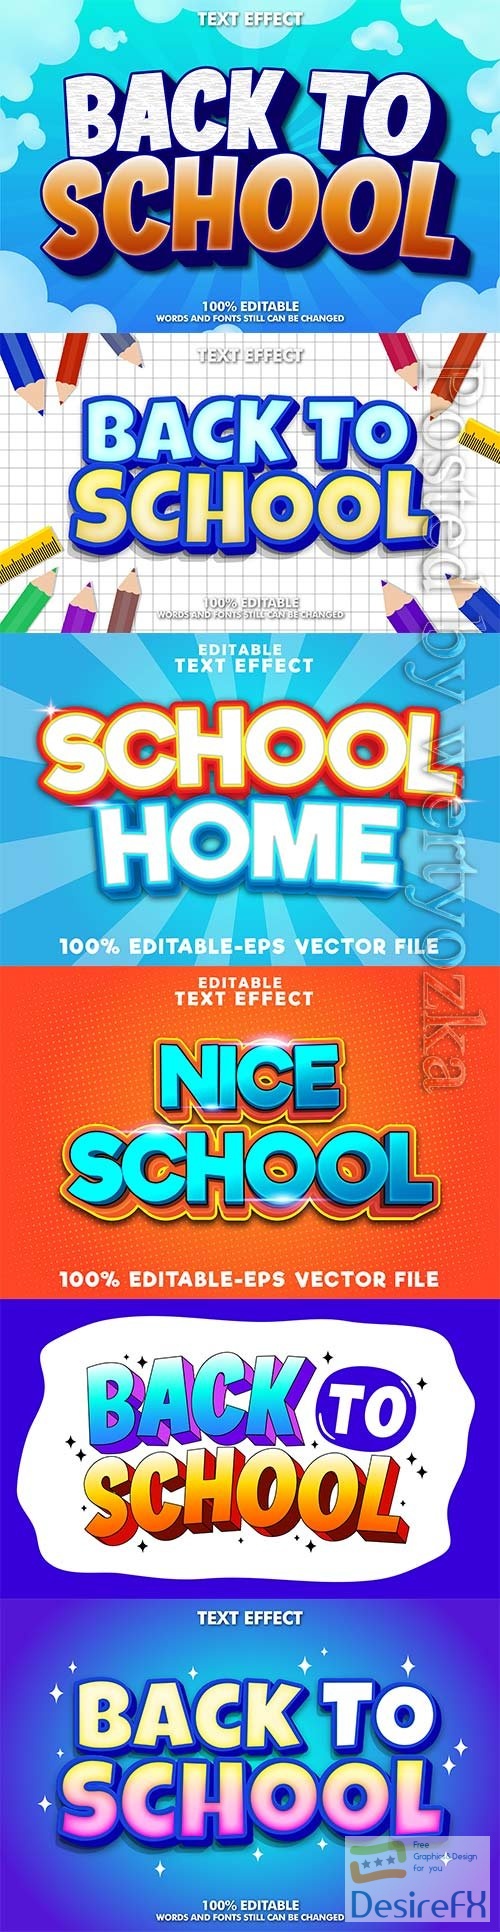 Back to school editable text effect vol 15